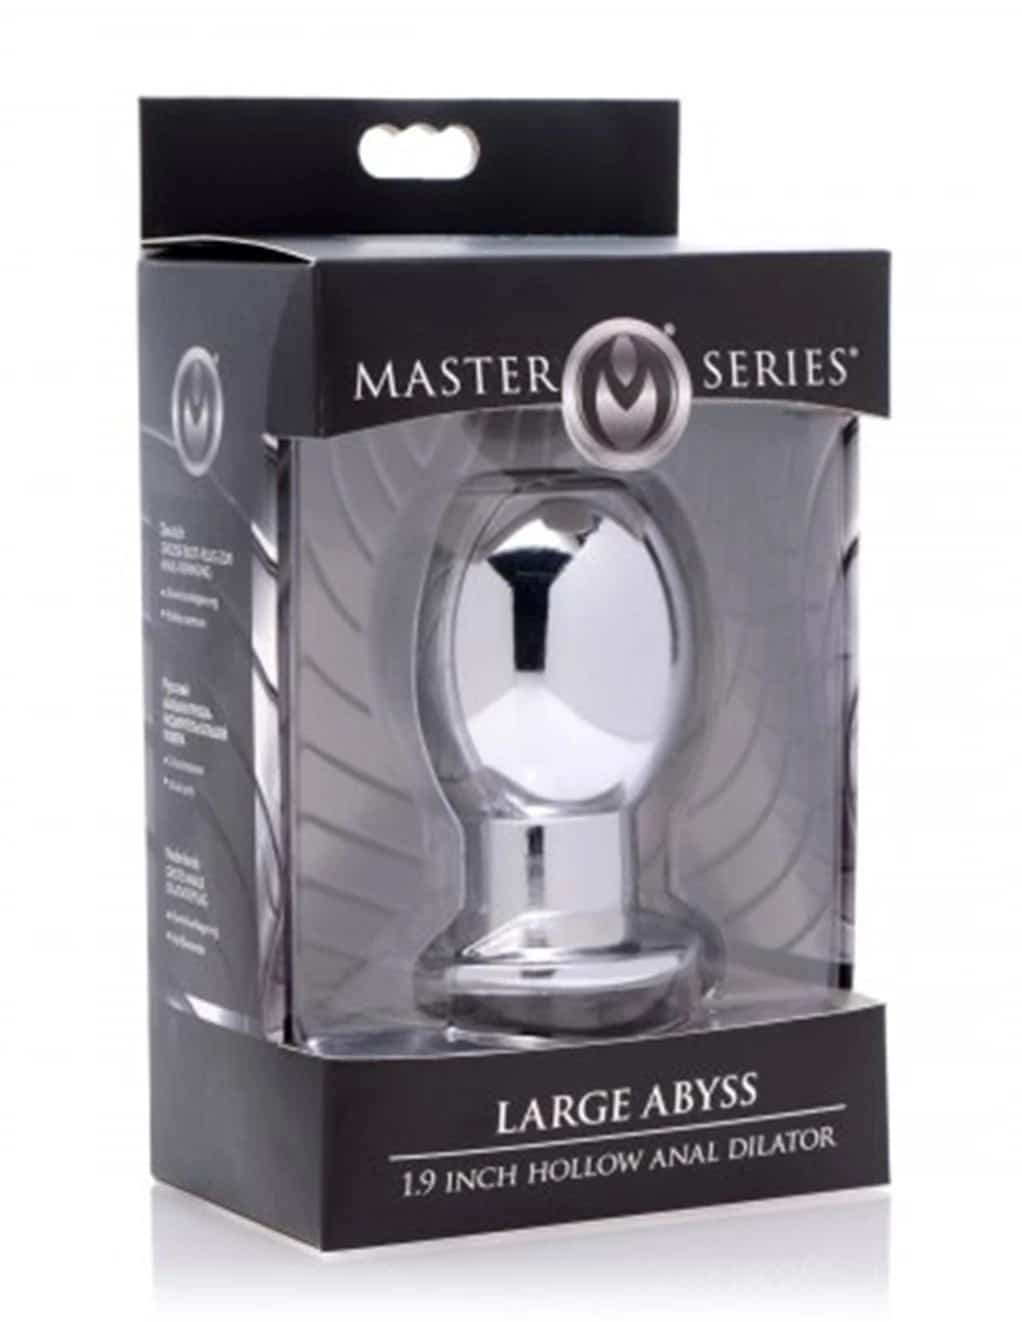 Master Series Abyss Hollow Anal Dilator. Slide 3